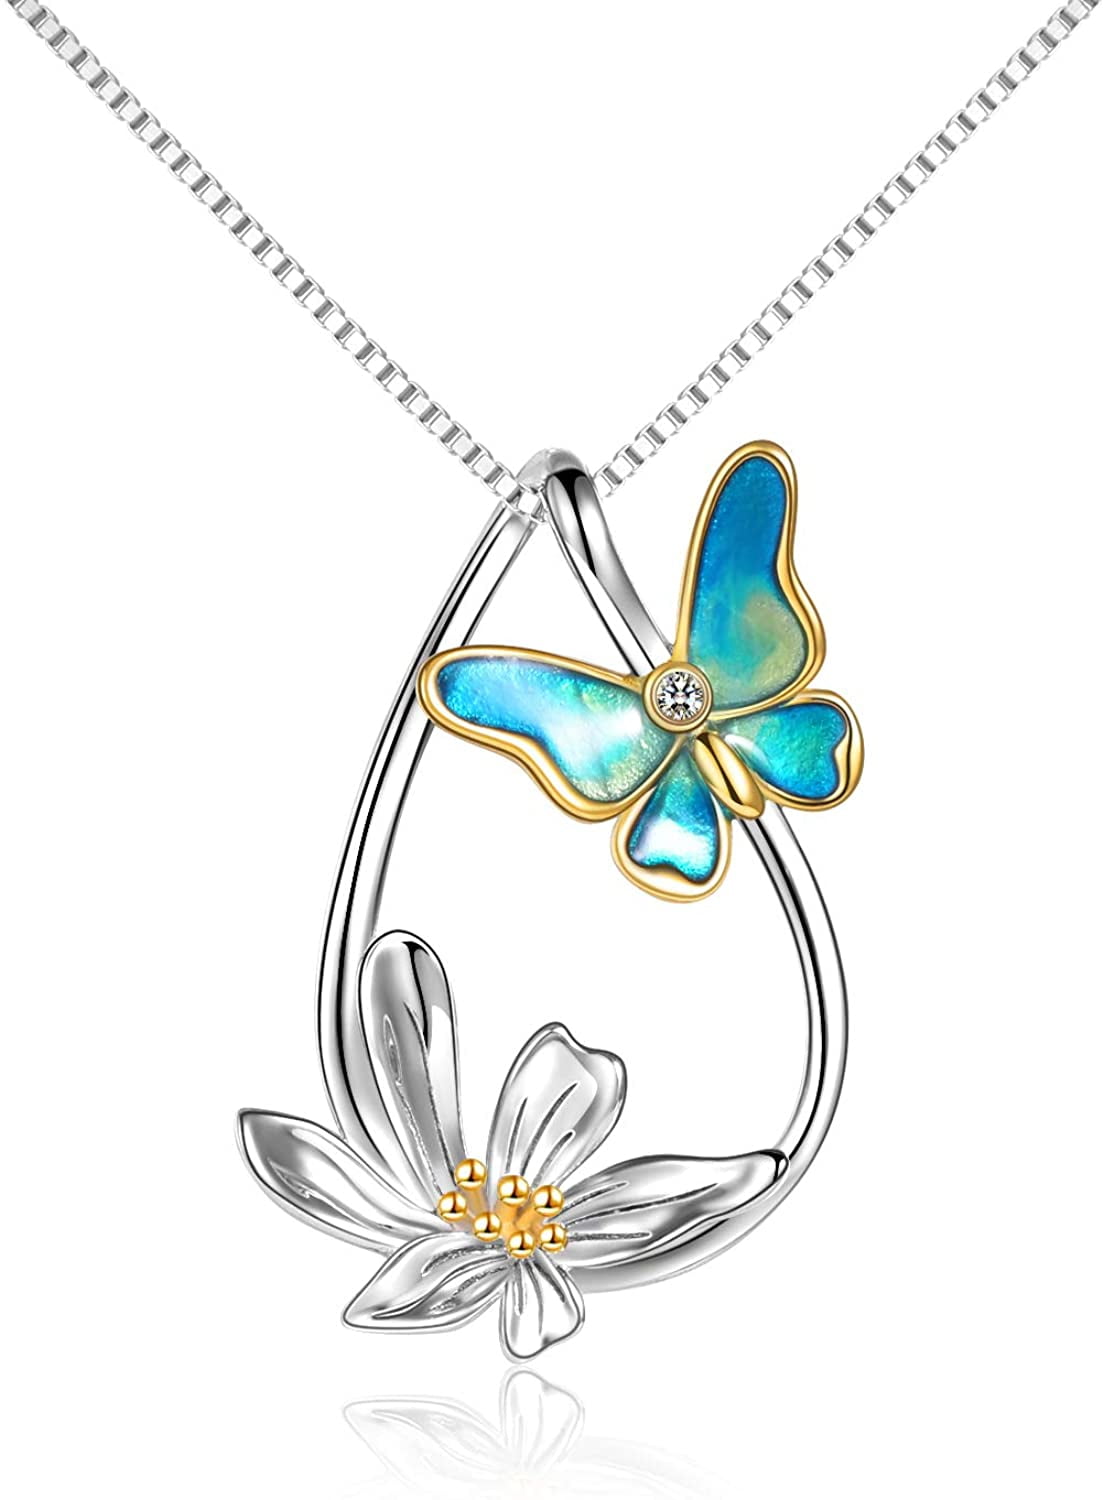 Pressed Flower Daisy Resin Tear Drop Pendant Gold Necklace Texas Jewelry